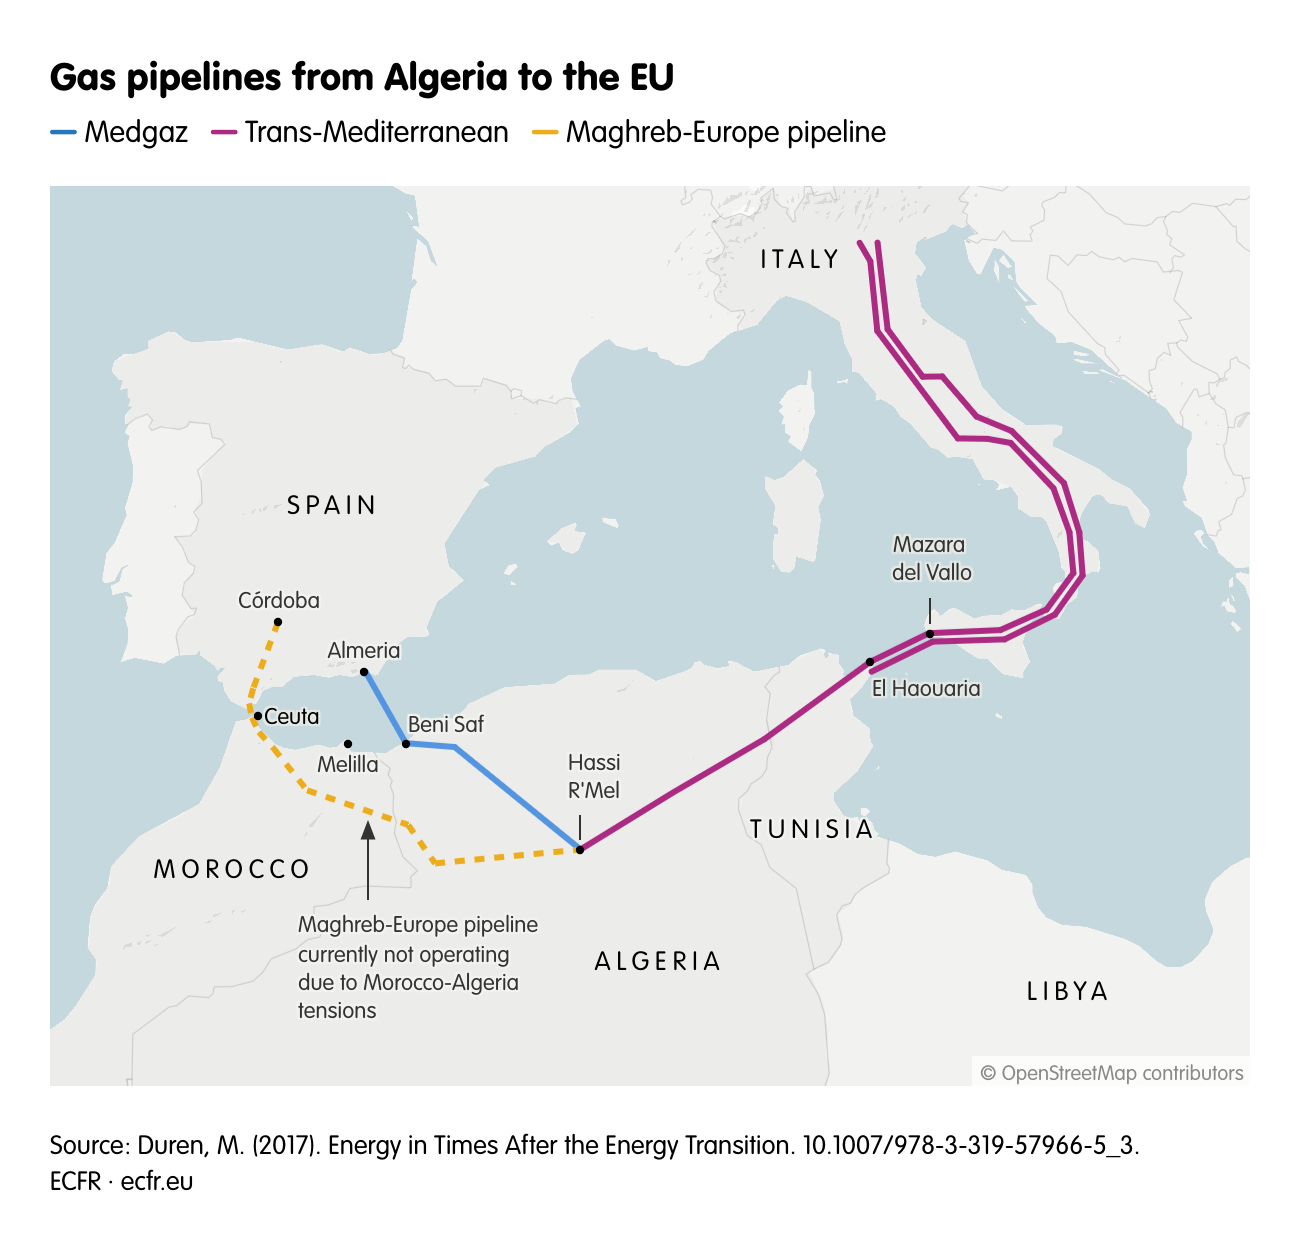 Gas pipelines from Algeria to the EU